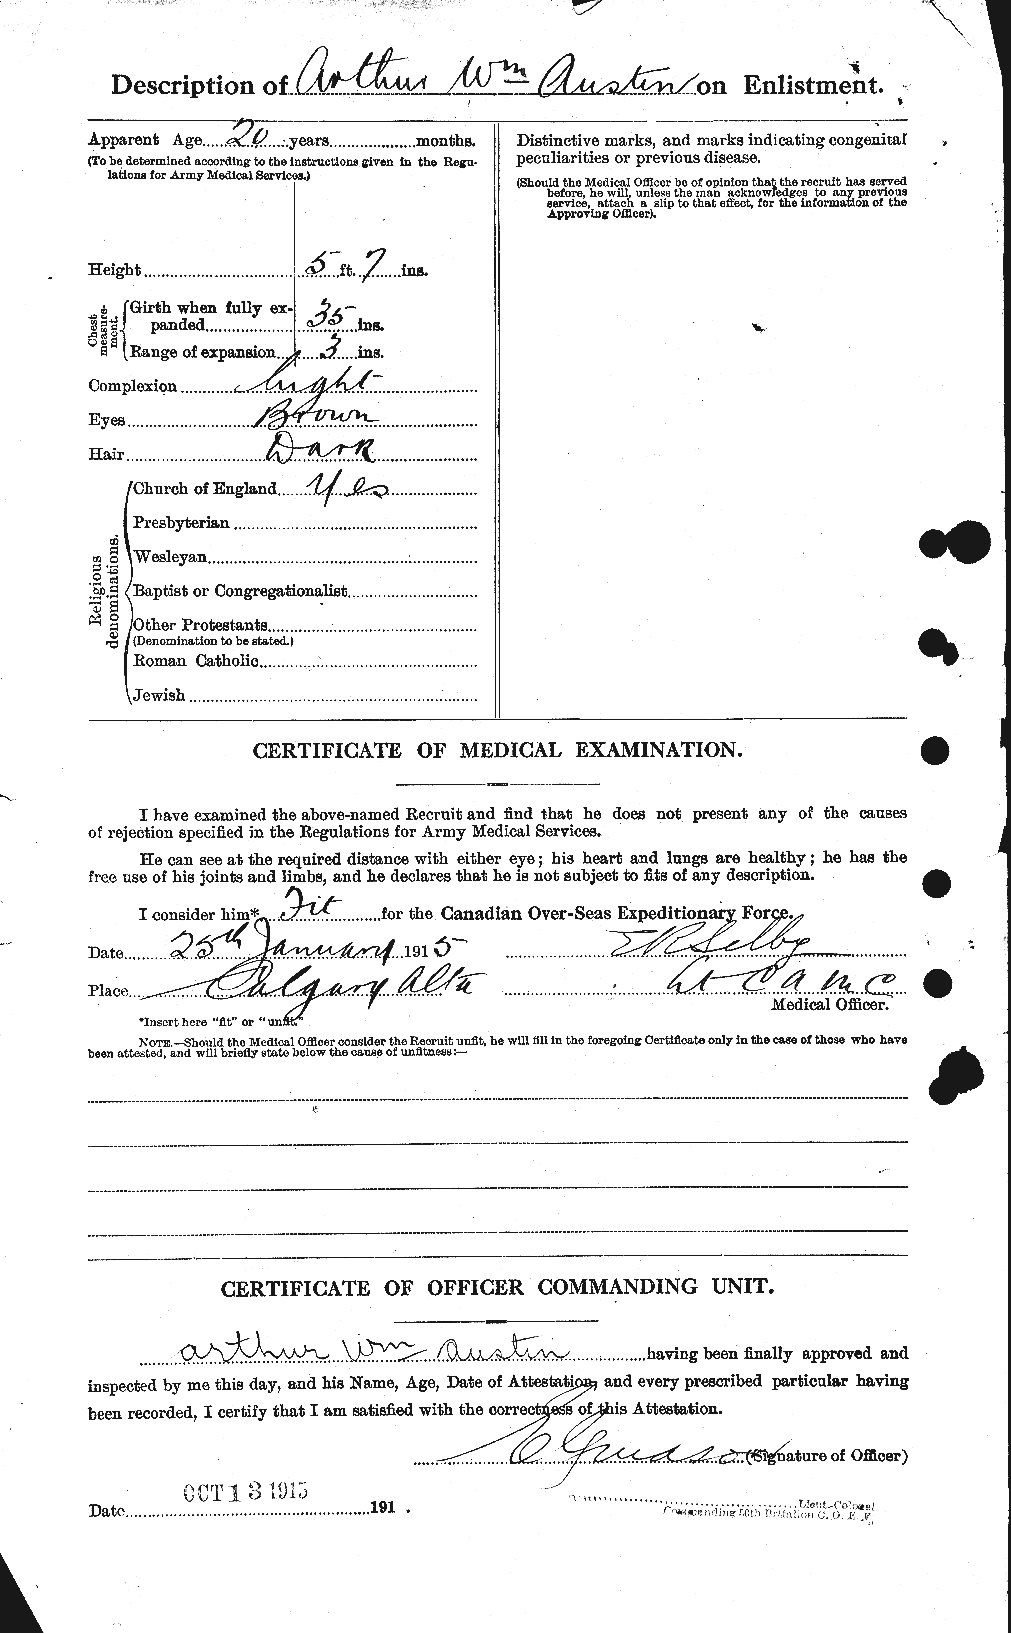 Personnel Records of the First World War - CEF 215453b